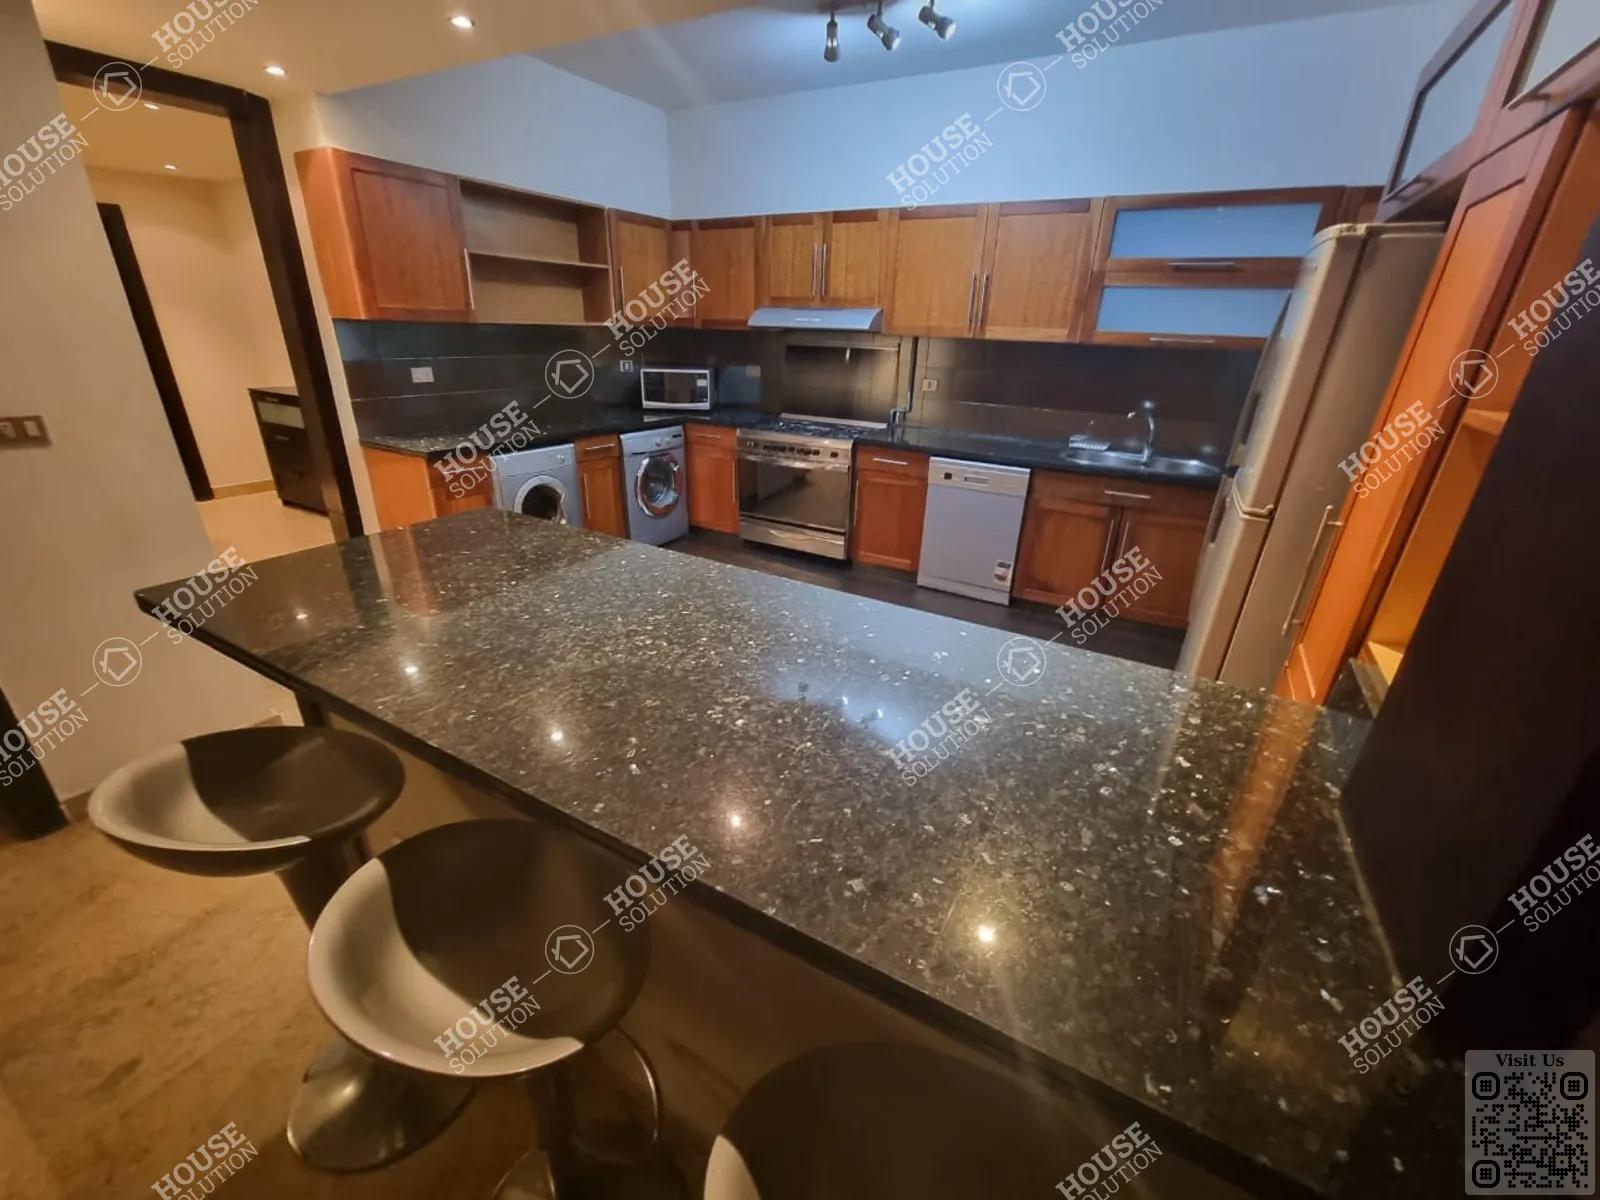 KITCHEN  @ Apartments For Rent In Maadi Maadi Degla Area: 200 m² consists of 3 Bedrooms 2 Bathrooms Modern furnished 5 stars #4504-1